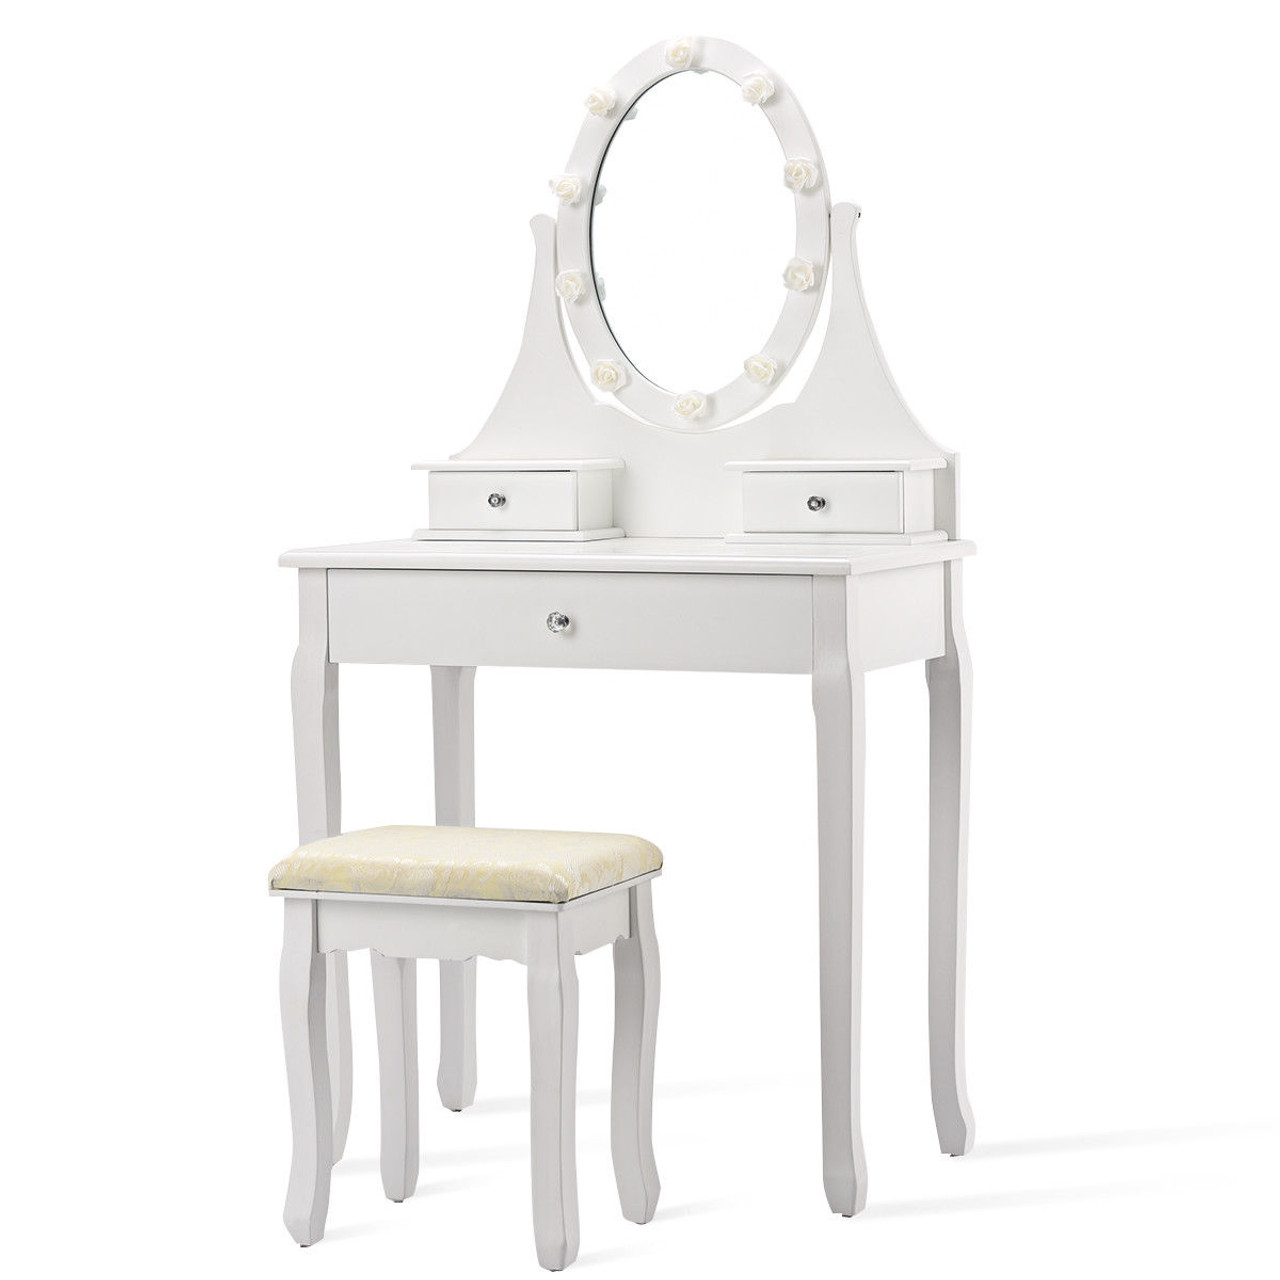 3 Drawers Lighted Mirror Vanity Dressing Table Stool Set White Hw60150wh By Cw